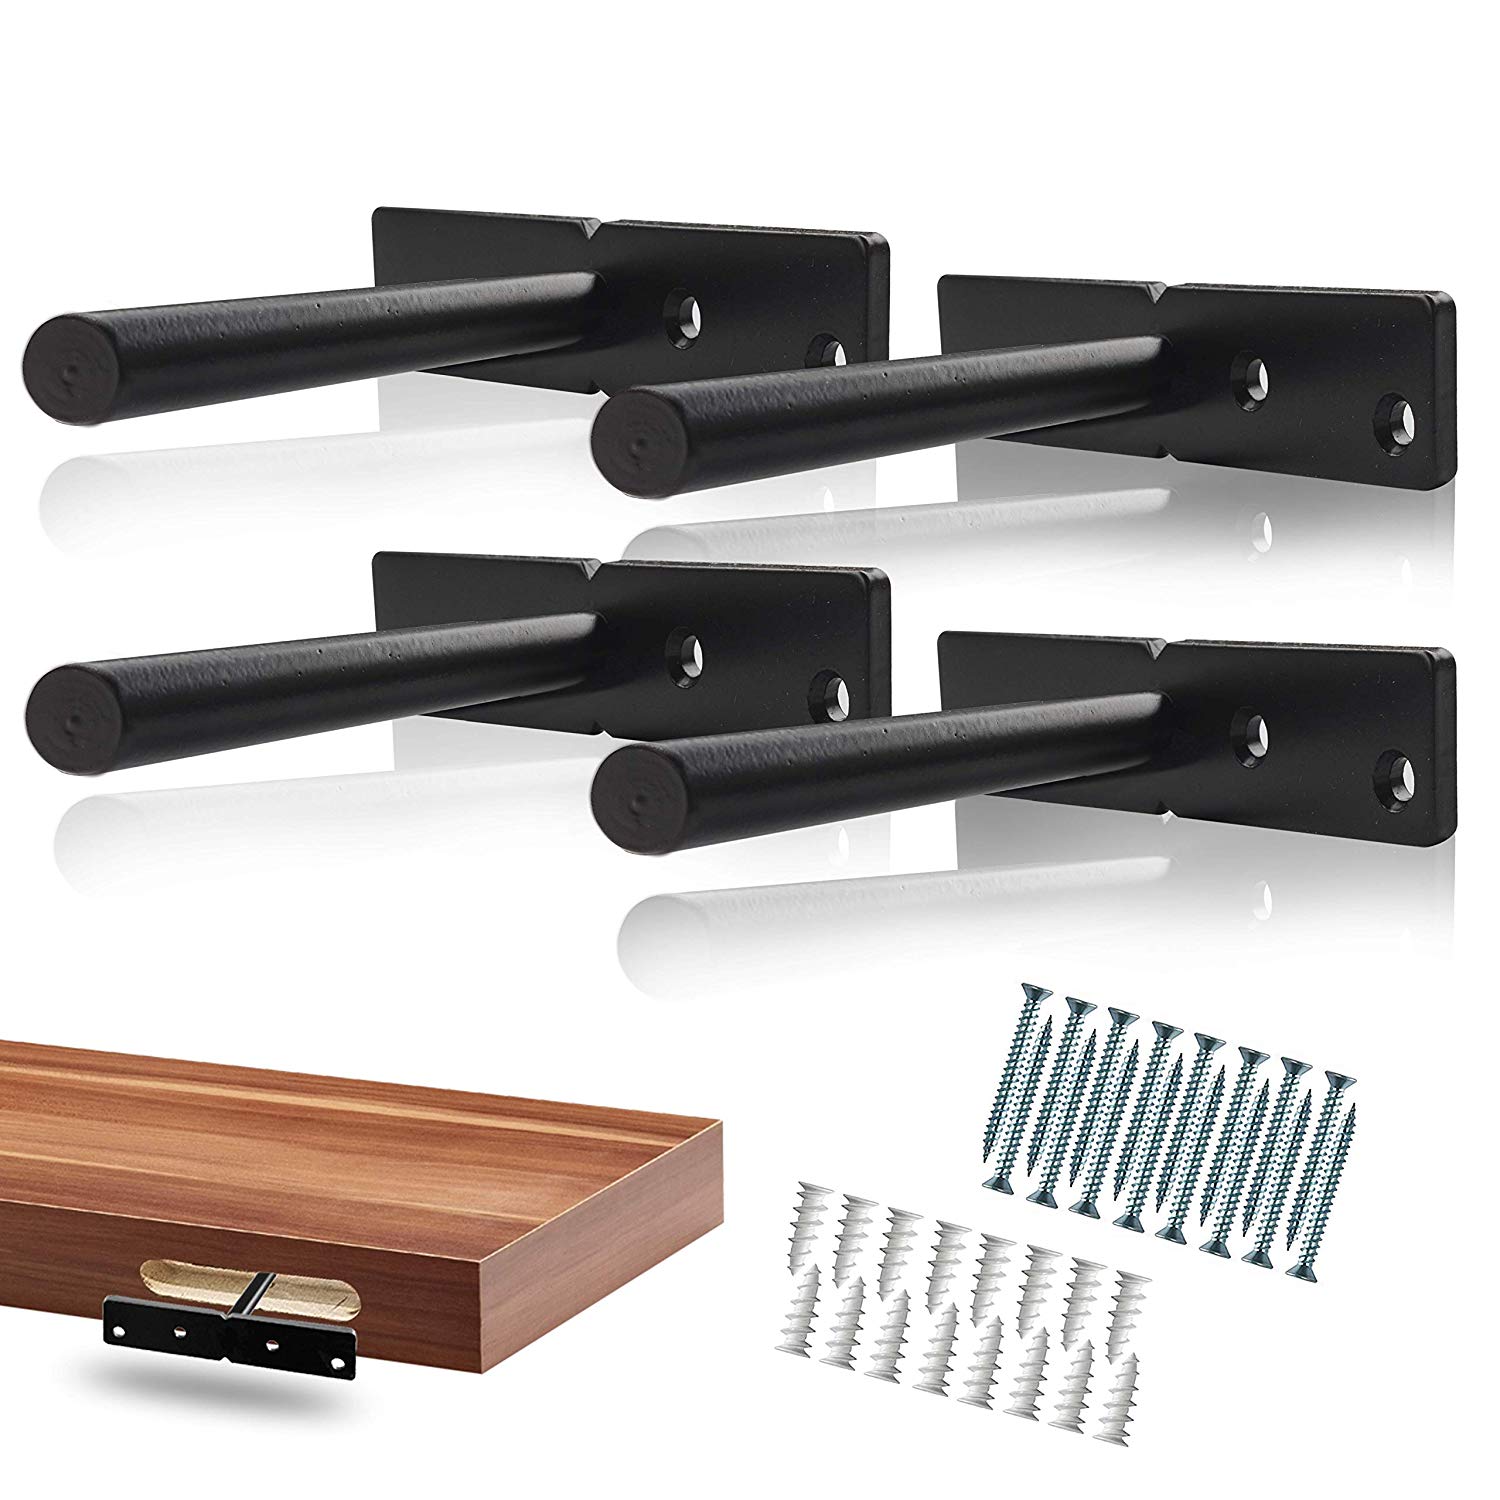 floating shelf bracket black heavy duty inch pack concealed brackets invisible blind hidden steel supports for wood screws wall plugs included best space saving computer desk